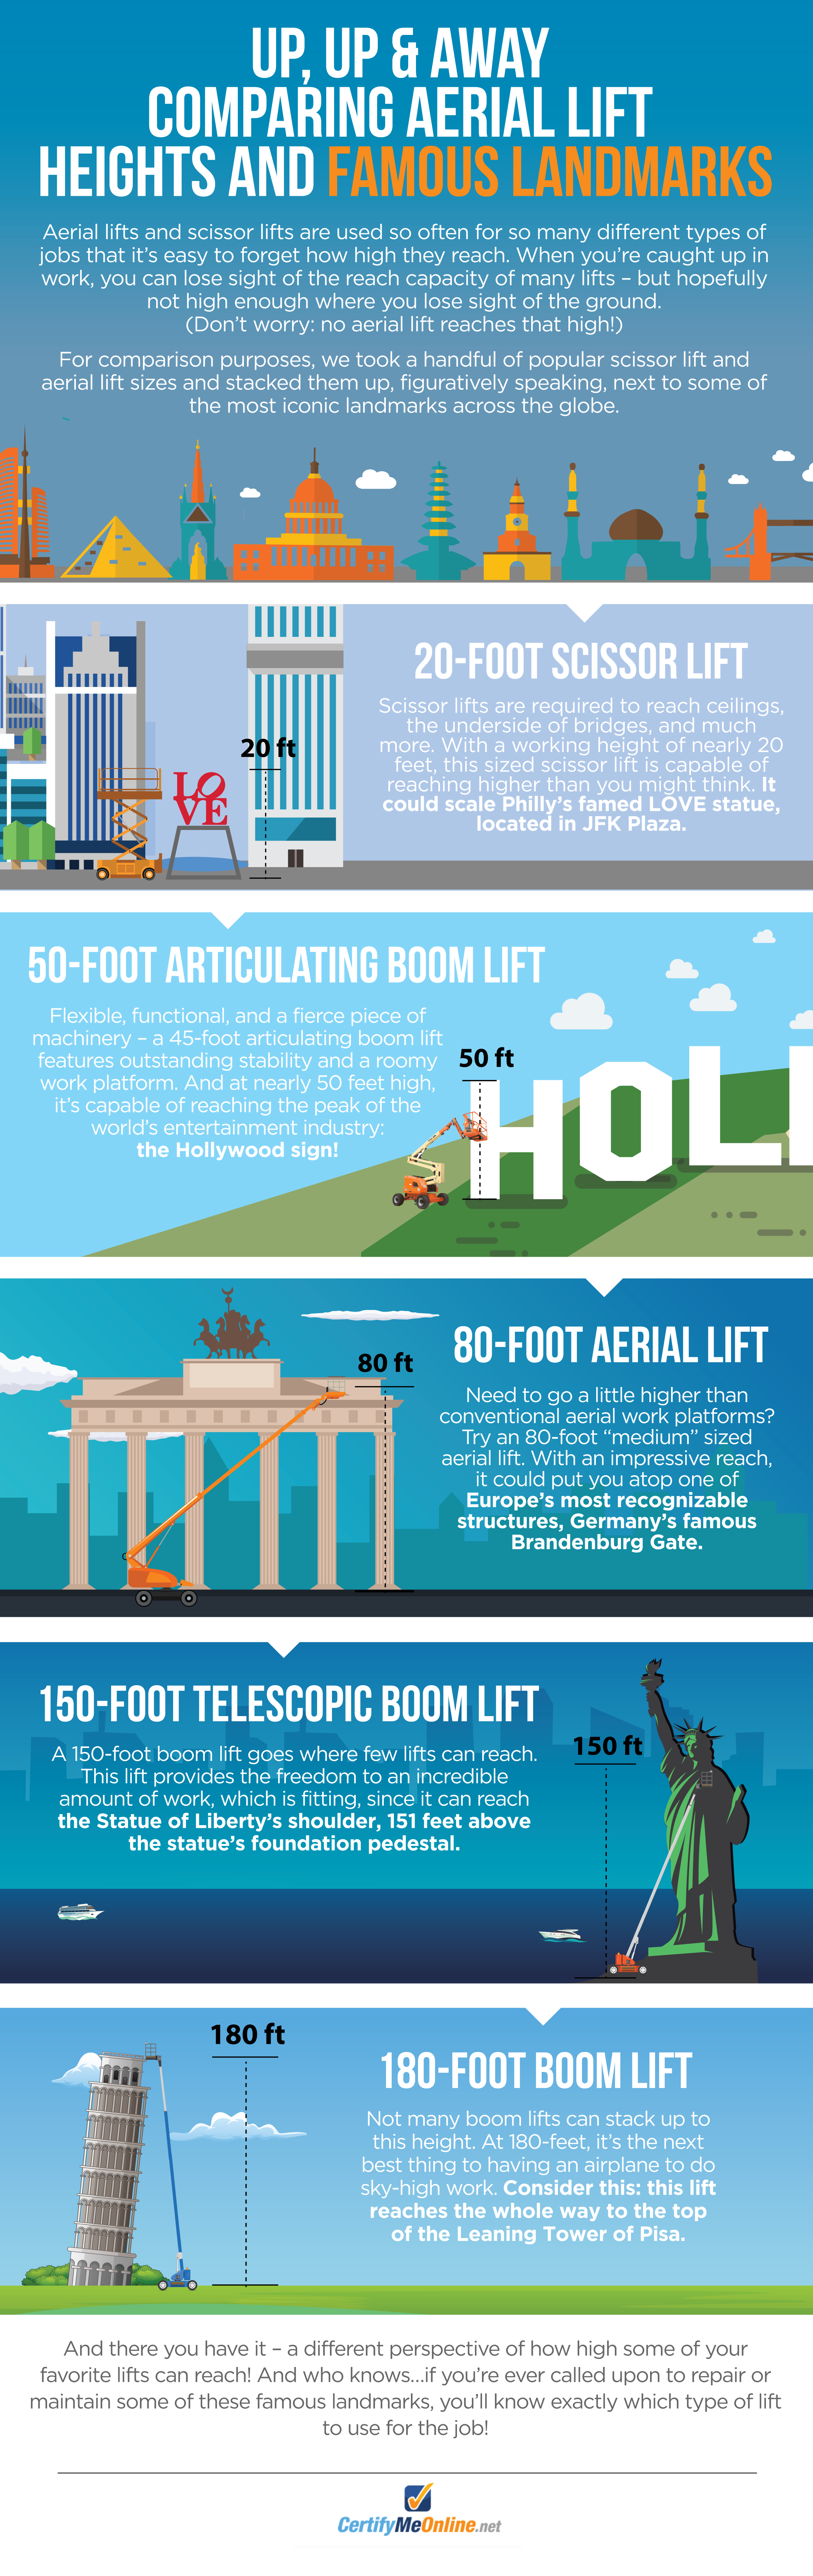 Comparing Aerial Lift Heights and Famous Landmarks 